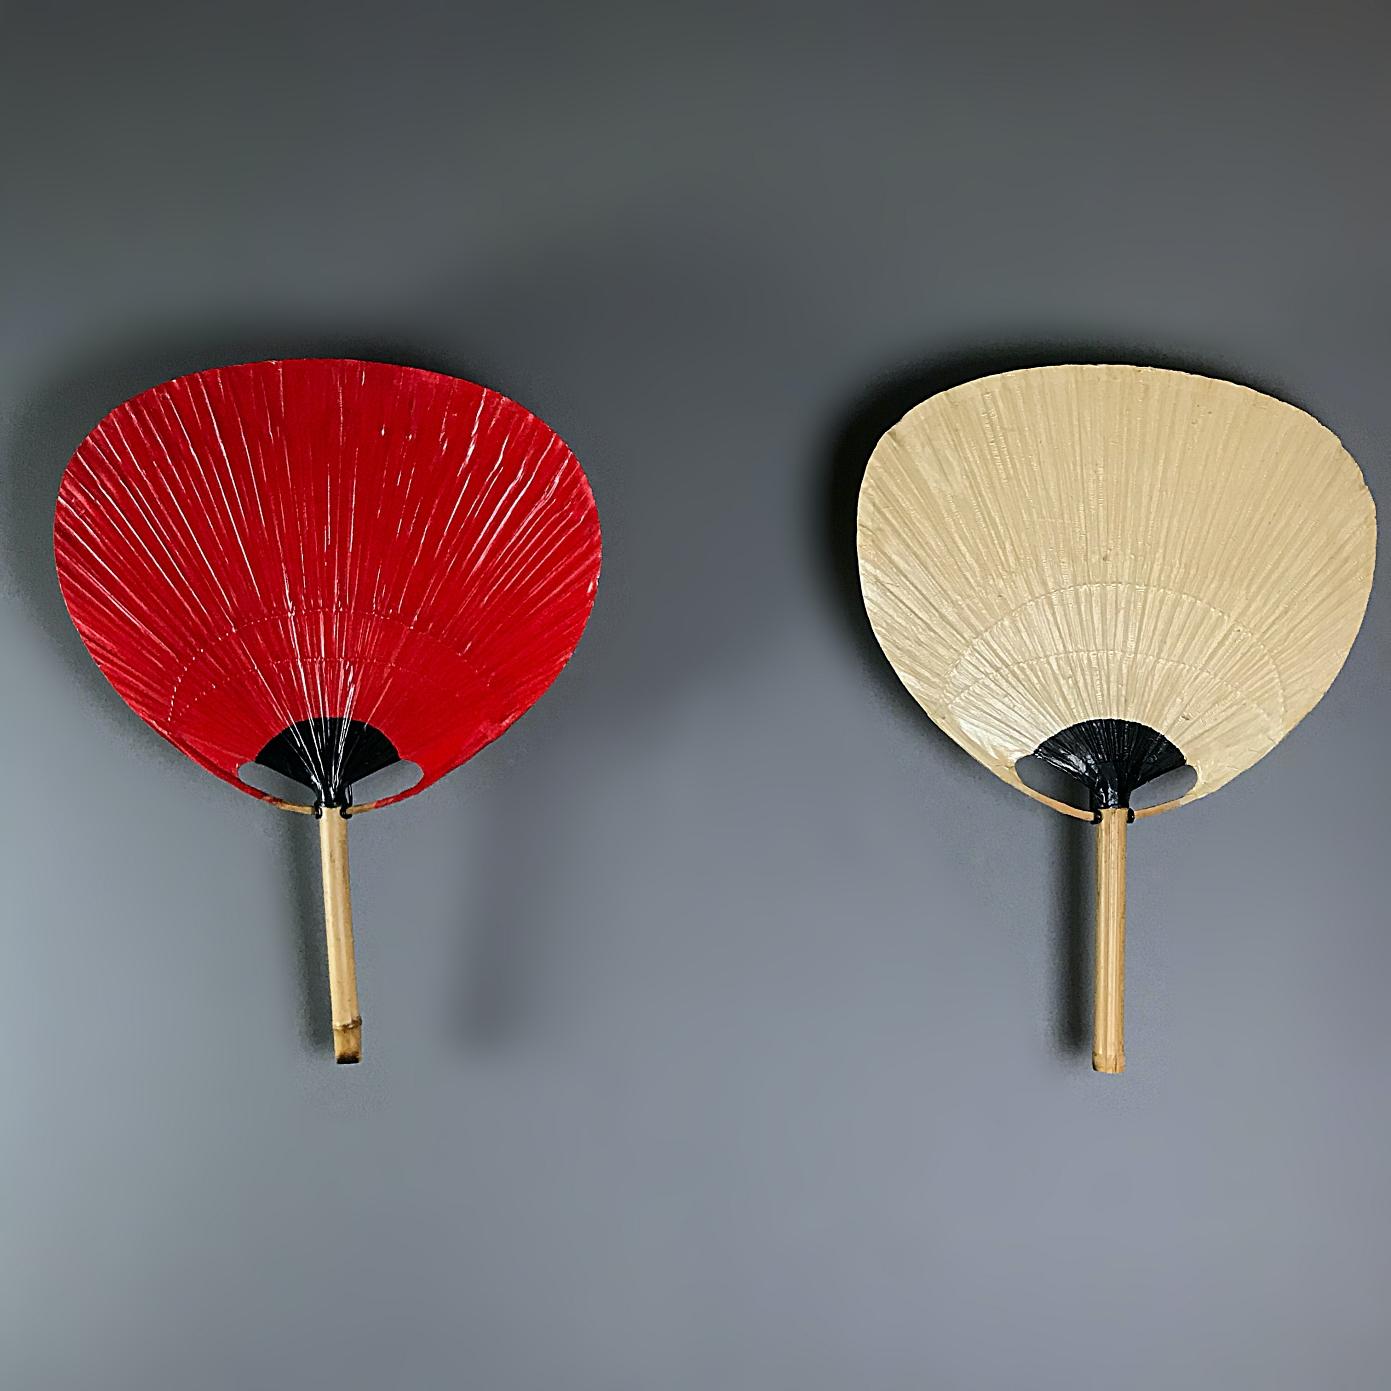 Beautiful Ingo Maurer Uchiwa ll fan lamp with metal holder for wall hanging. The lamp is made of natural bamboo and rice paper by artisans in the 1970s. The metal holder is equipped with an original Edison bulb holder, a new white wire with on/off